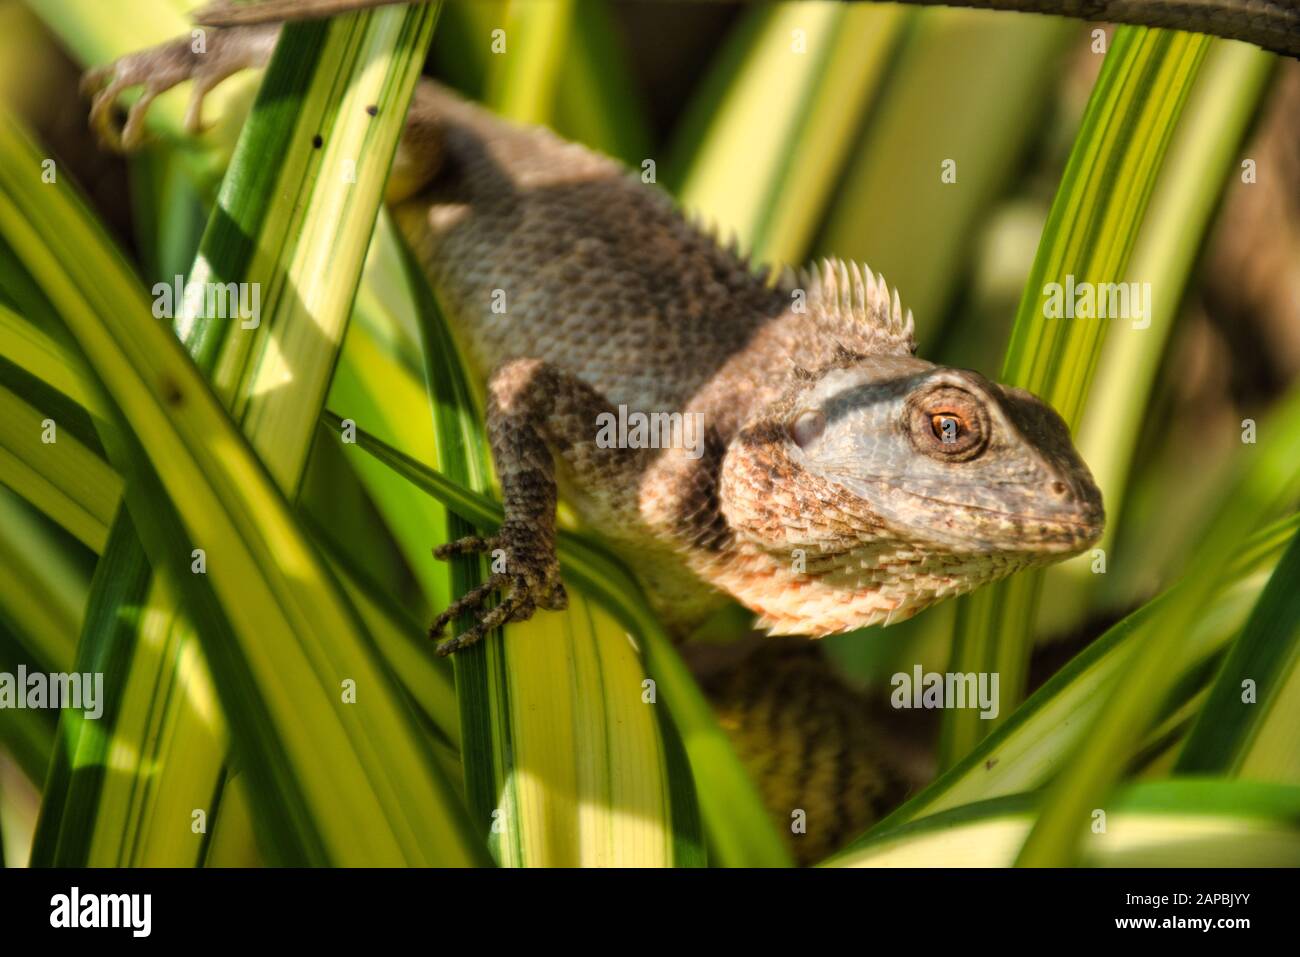 Oriental garden lizard (Calotes versicolor) in Kanchanaburi, Thailand. It is an agamid lizard found widely distributed in Indomalaya Stock Photo